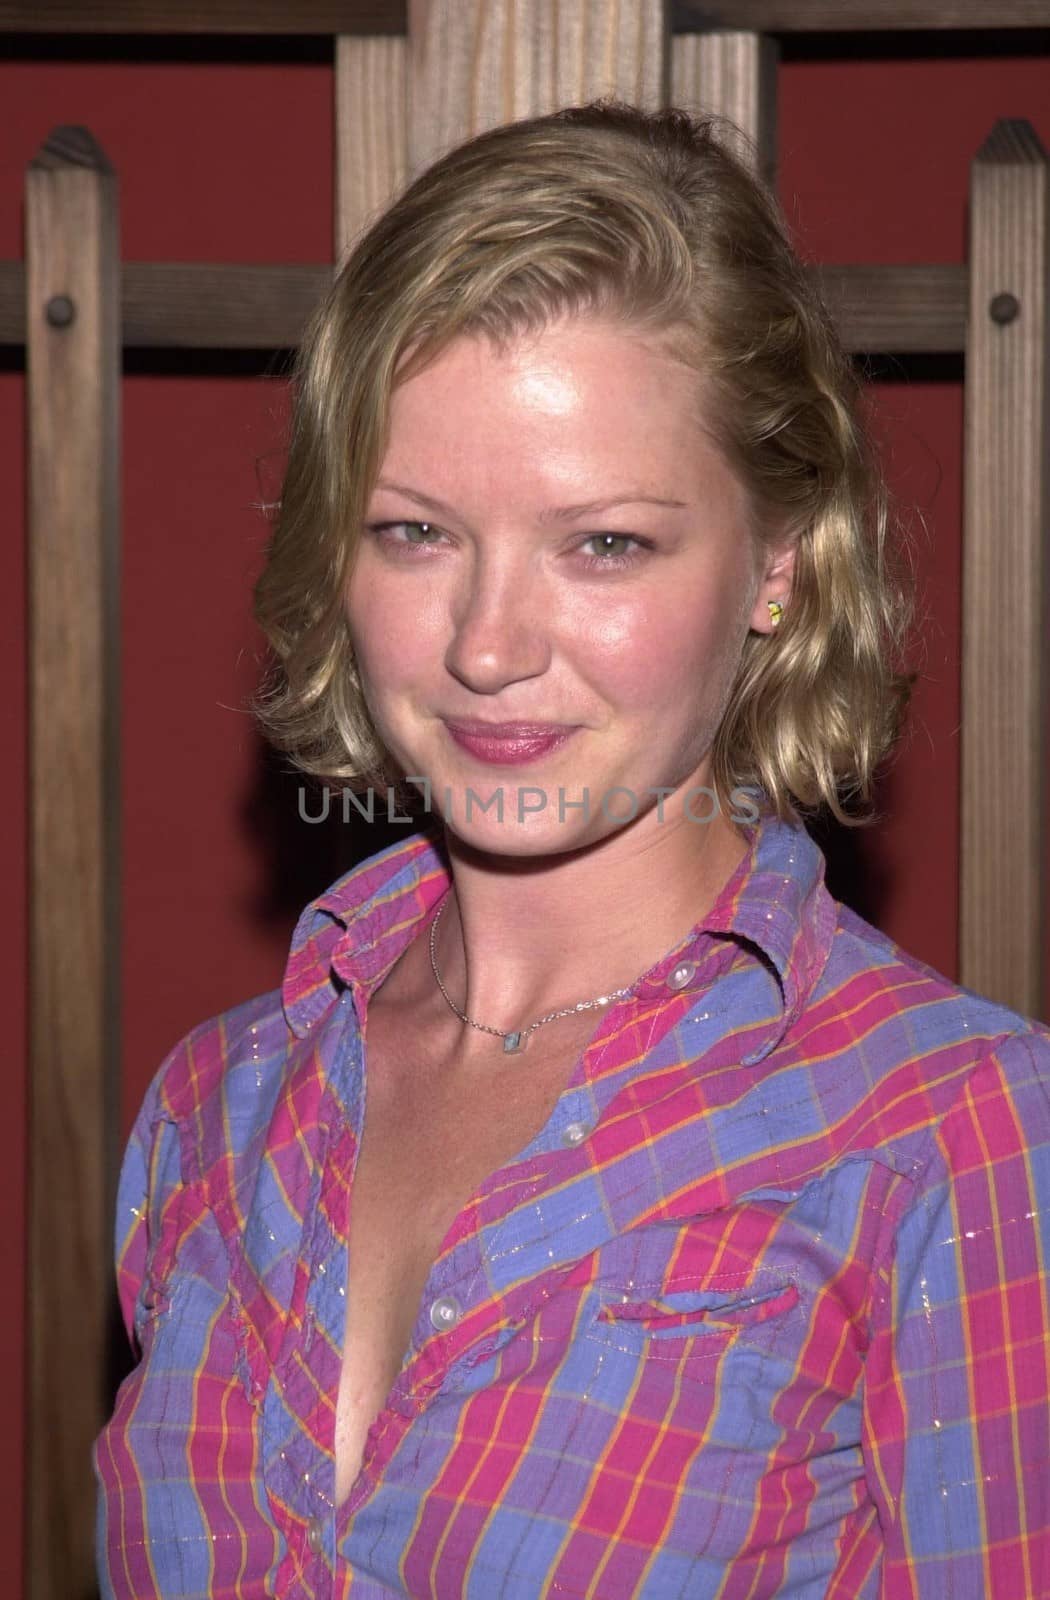 Gretchen Mol at the launch party for Eastwood Ranch's new lifestyle brand with "Denim Tapas and Tequila" held at Chadwick, Beverly Hills, CA 07-16-02